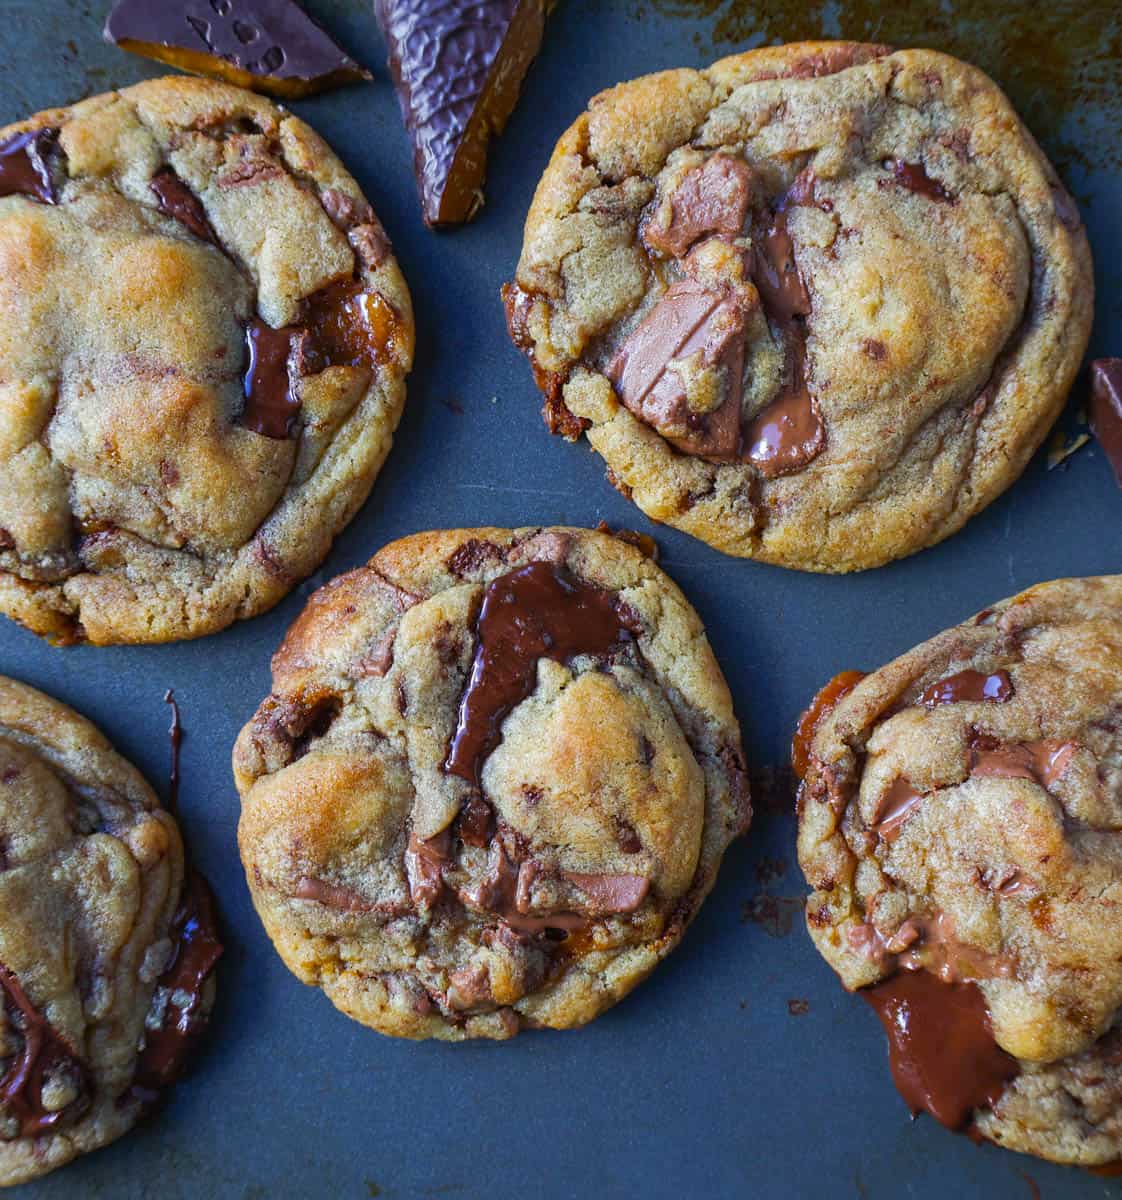 These are the Best Browned Butter Toffee Chocolate Chip Cookies that are perfectly soft and chewy with crisp edges and ooey gooey centers filled with chocolate and toffee chunks. 